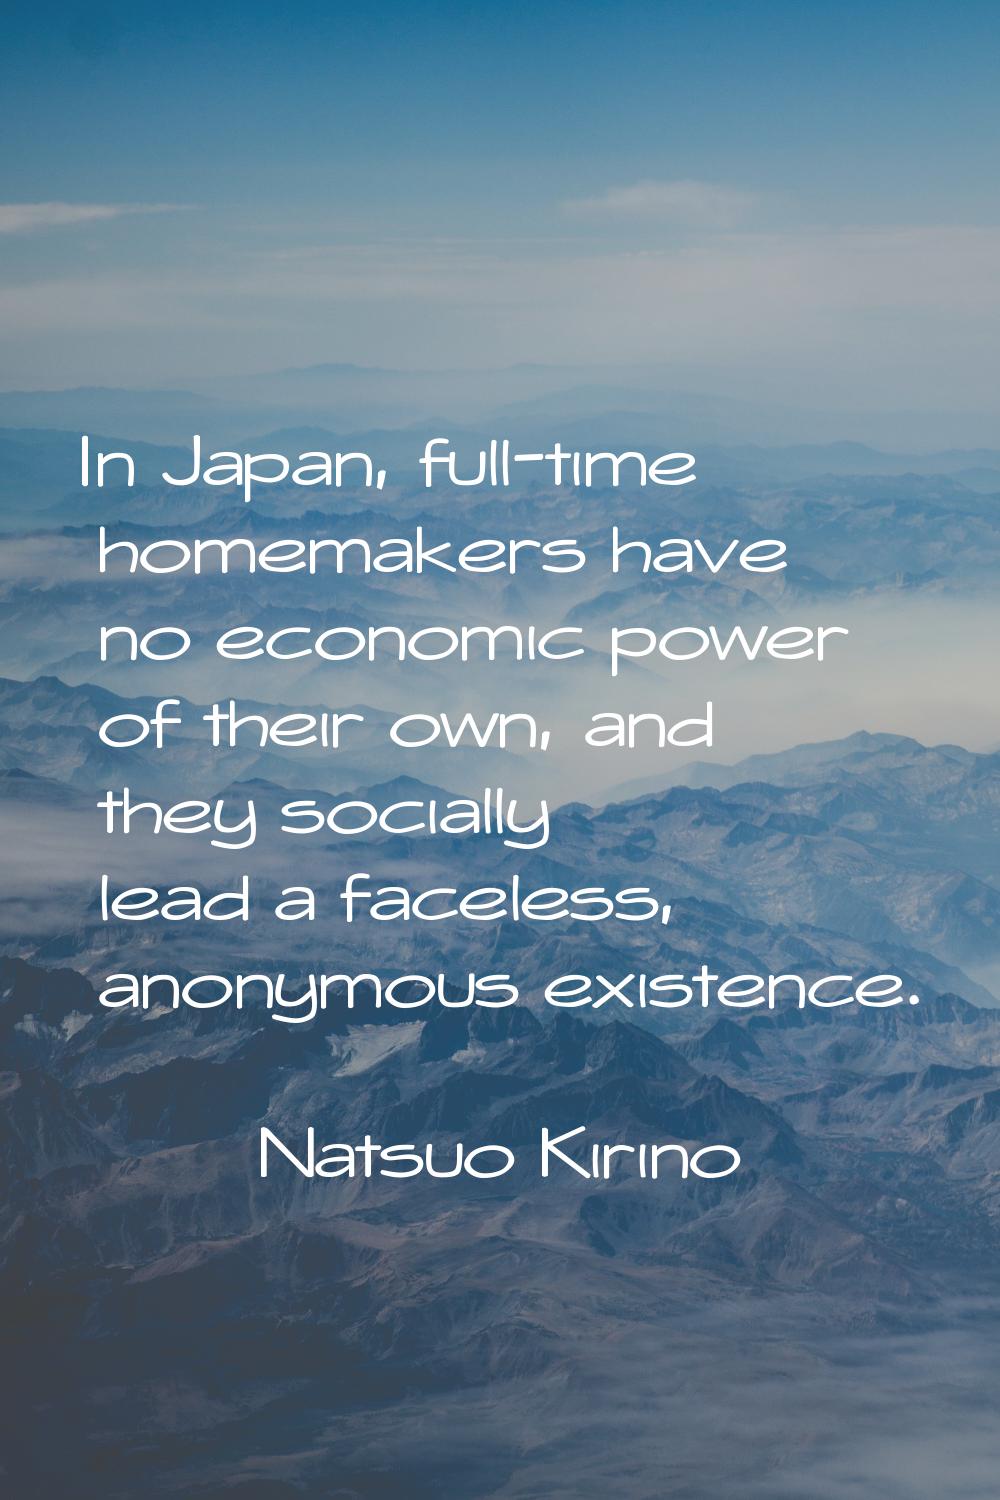 In Japan, full-time homemakers have no economic power of their own, and they socially lead a facele